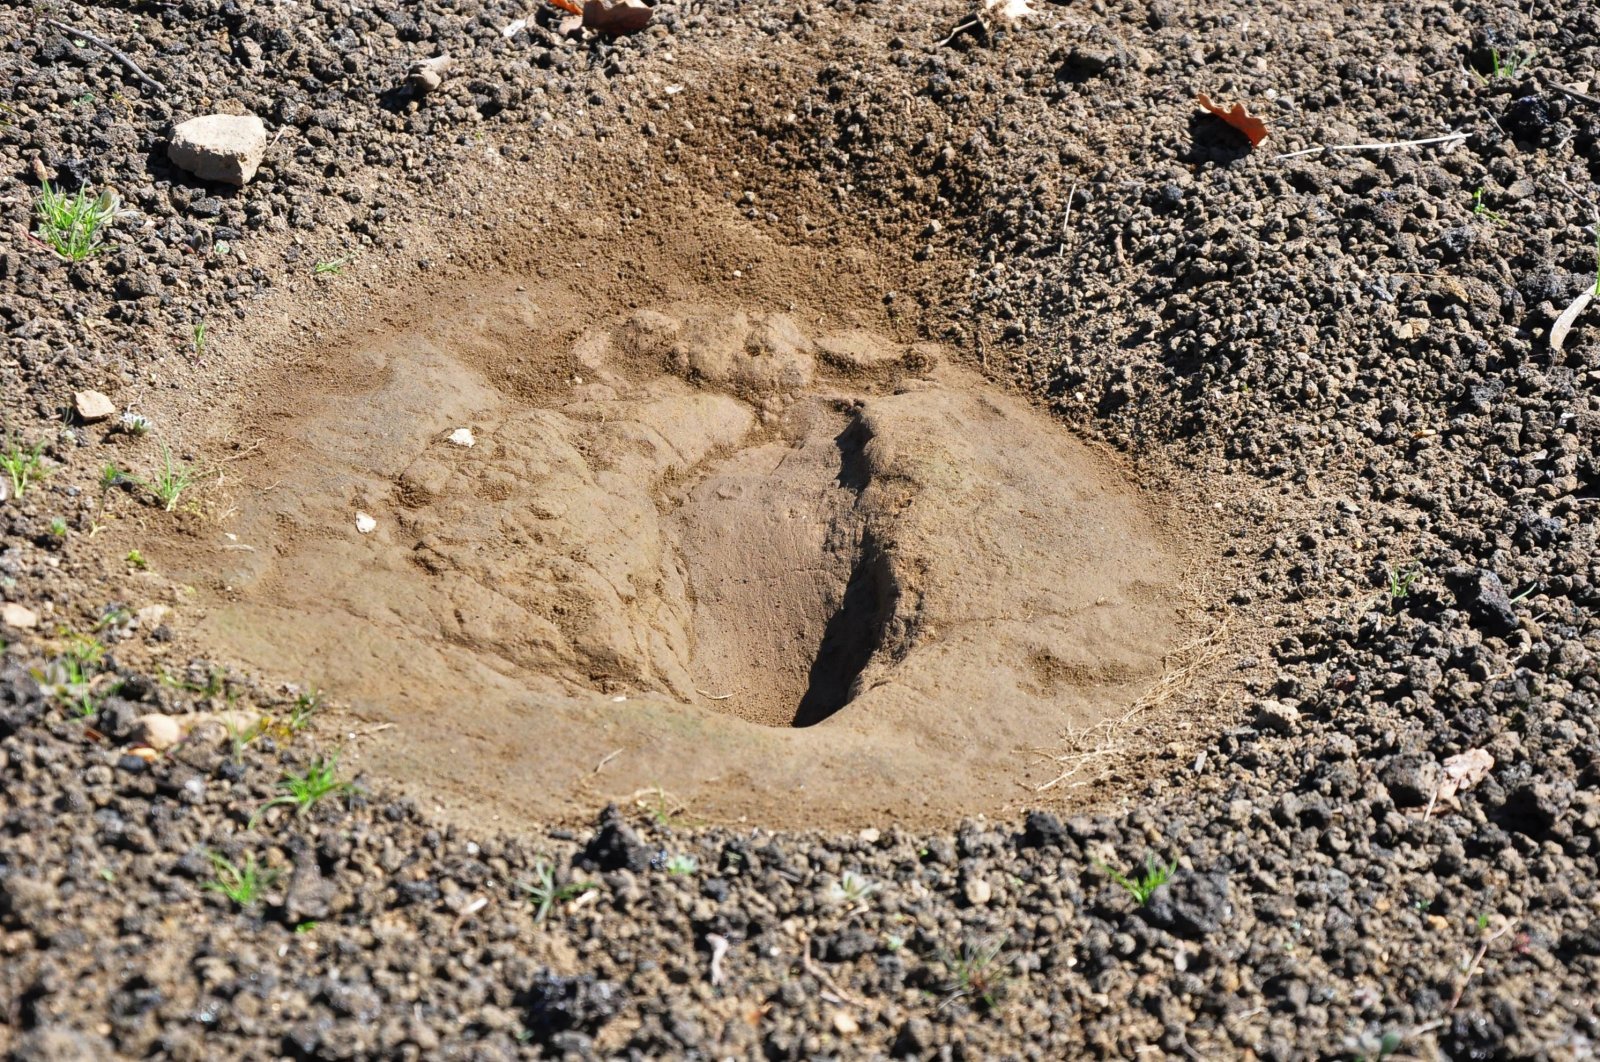 A 5,000-year-old footprint discovered in Turkey's western Manisa province, March 6, 2021. (DHA Photo)